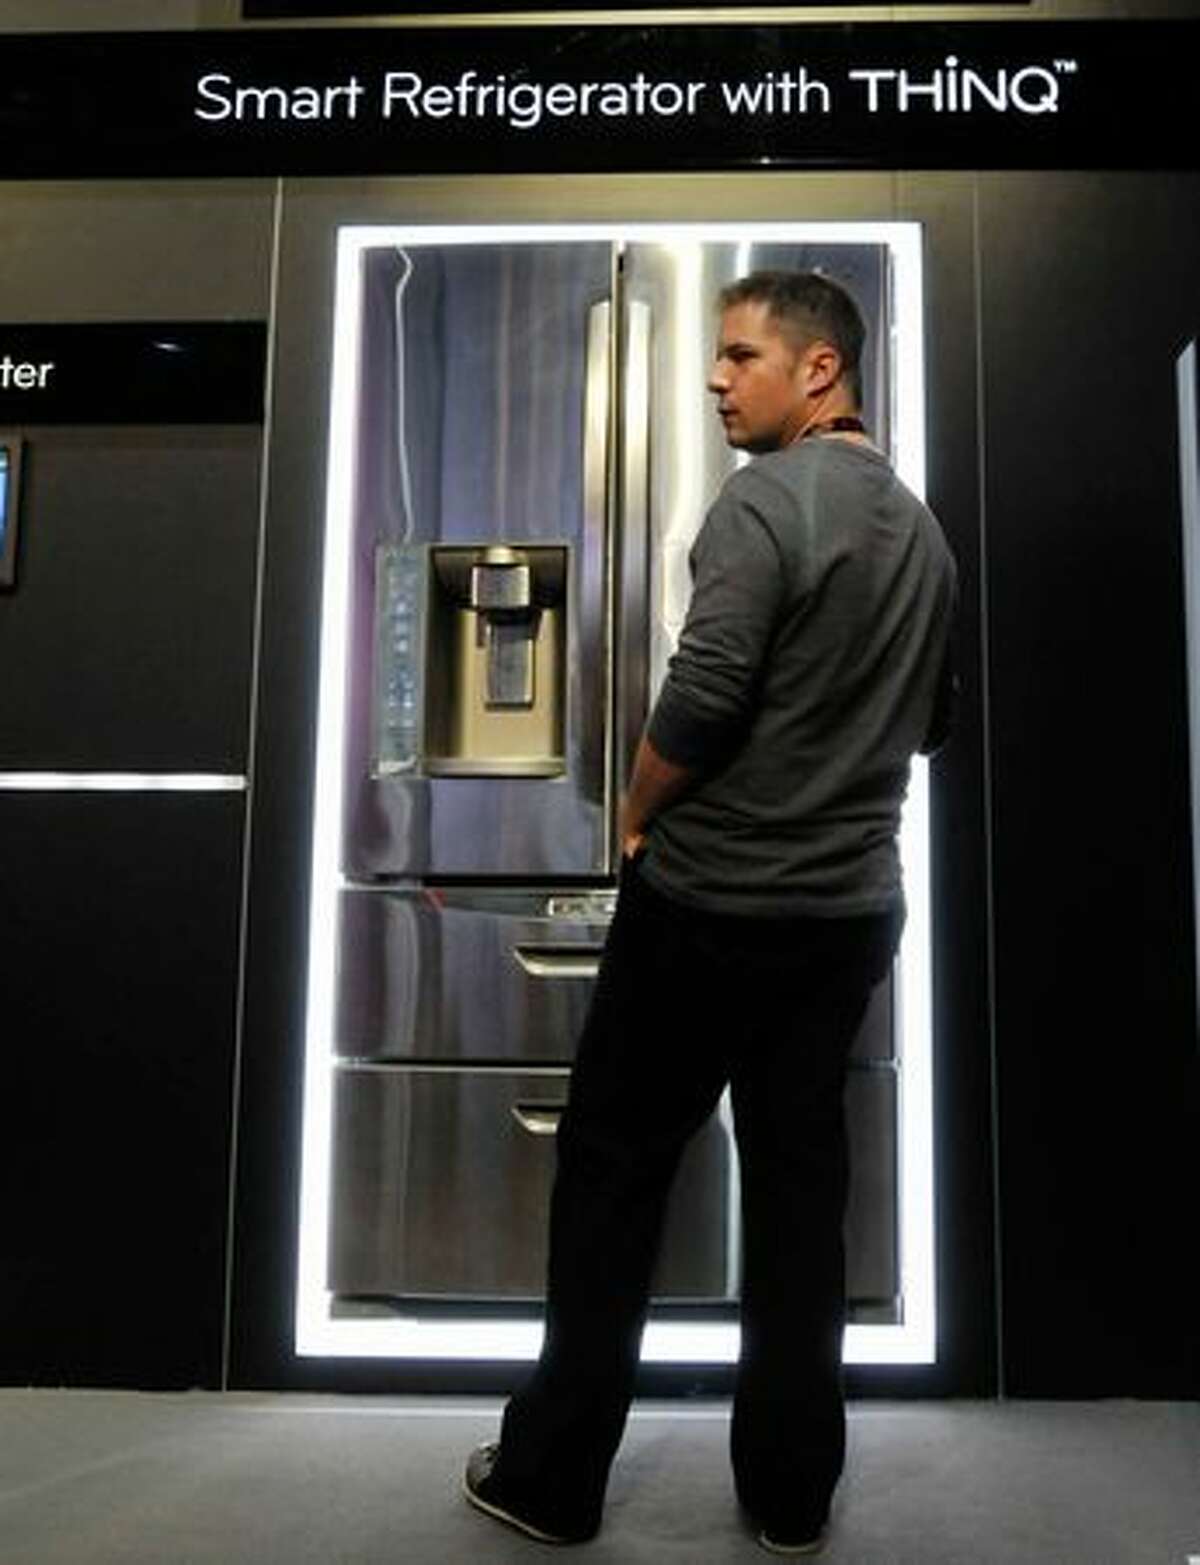 An attendee examines the LG Smart Refrigerator on Jan. 6 at the 2011 International Consumer Electronics Show in Las Vegas.